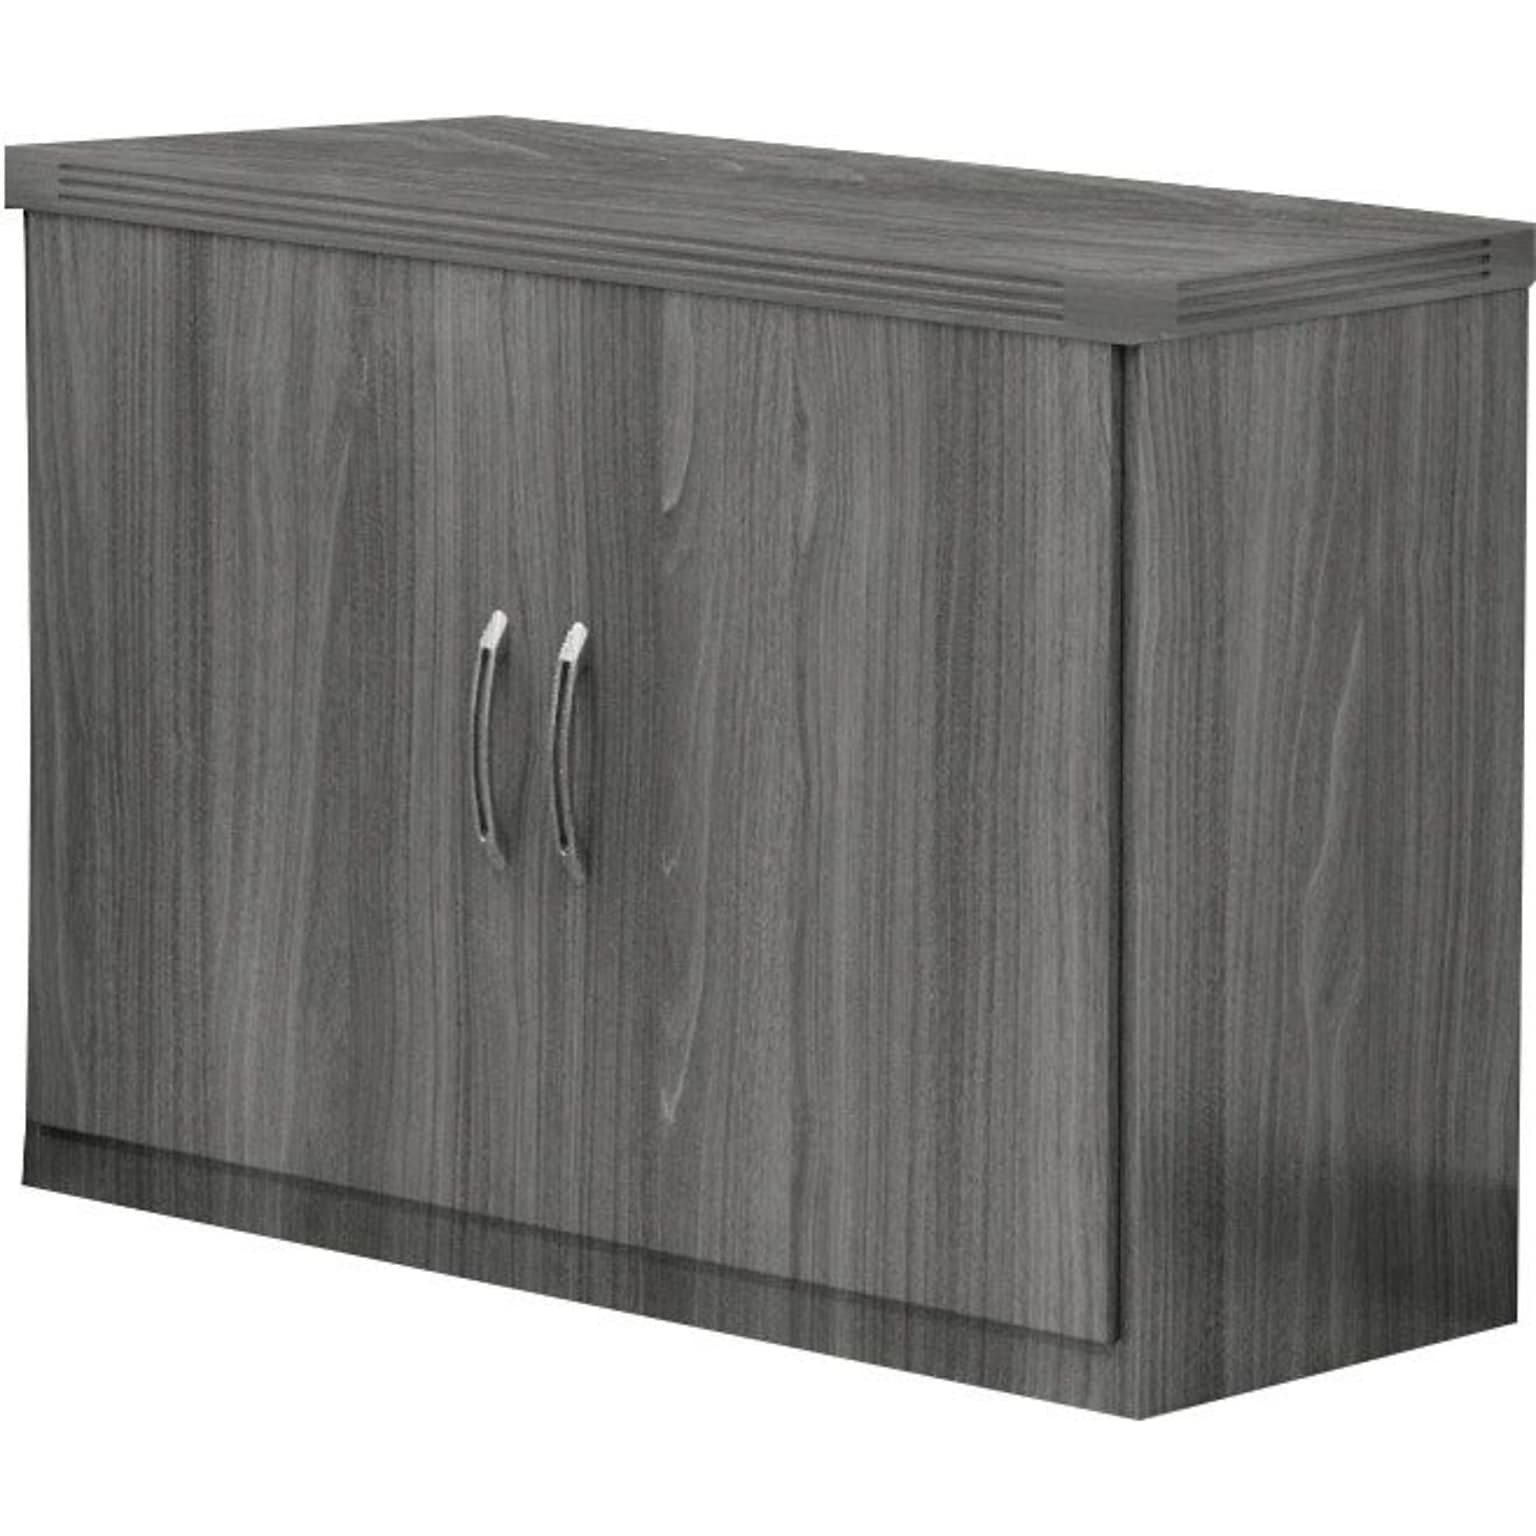 Safco 29 1/2H Aberdeen Storage Cabinet, Gray Steel (ASCLGS)